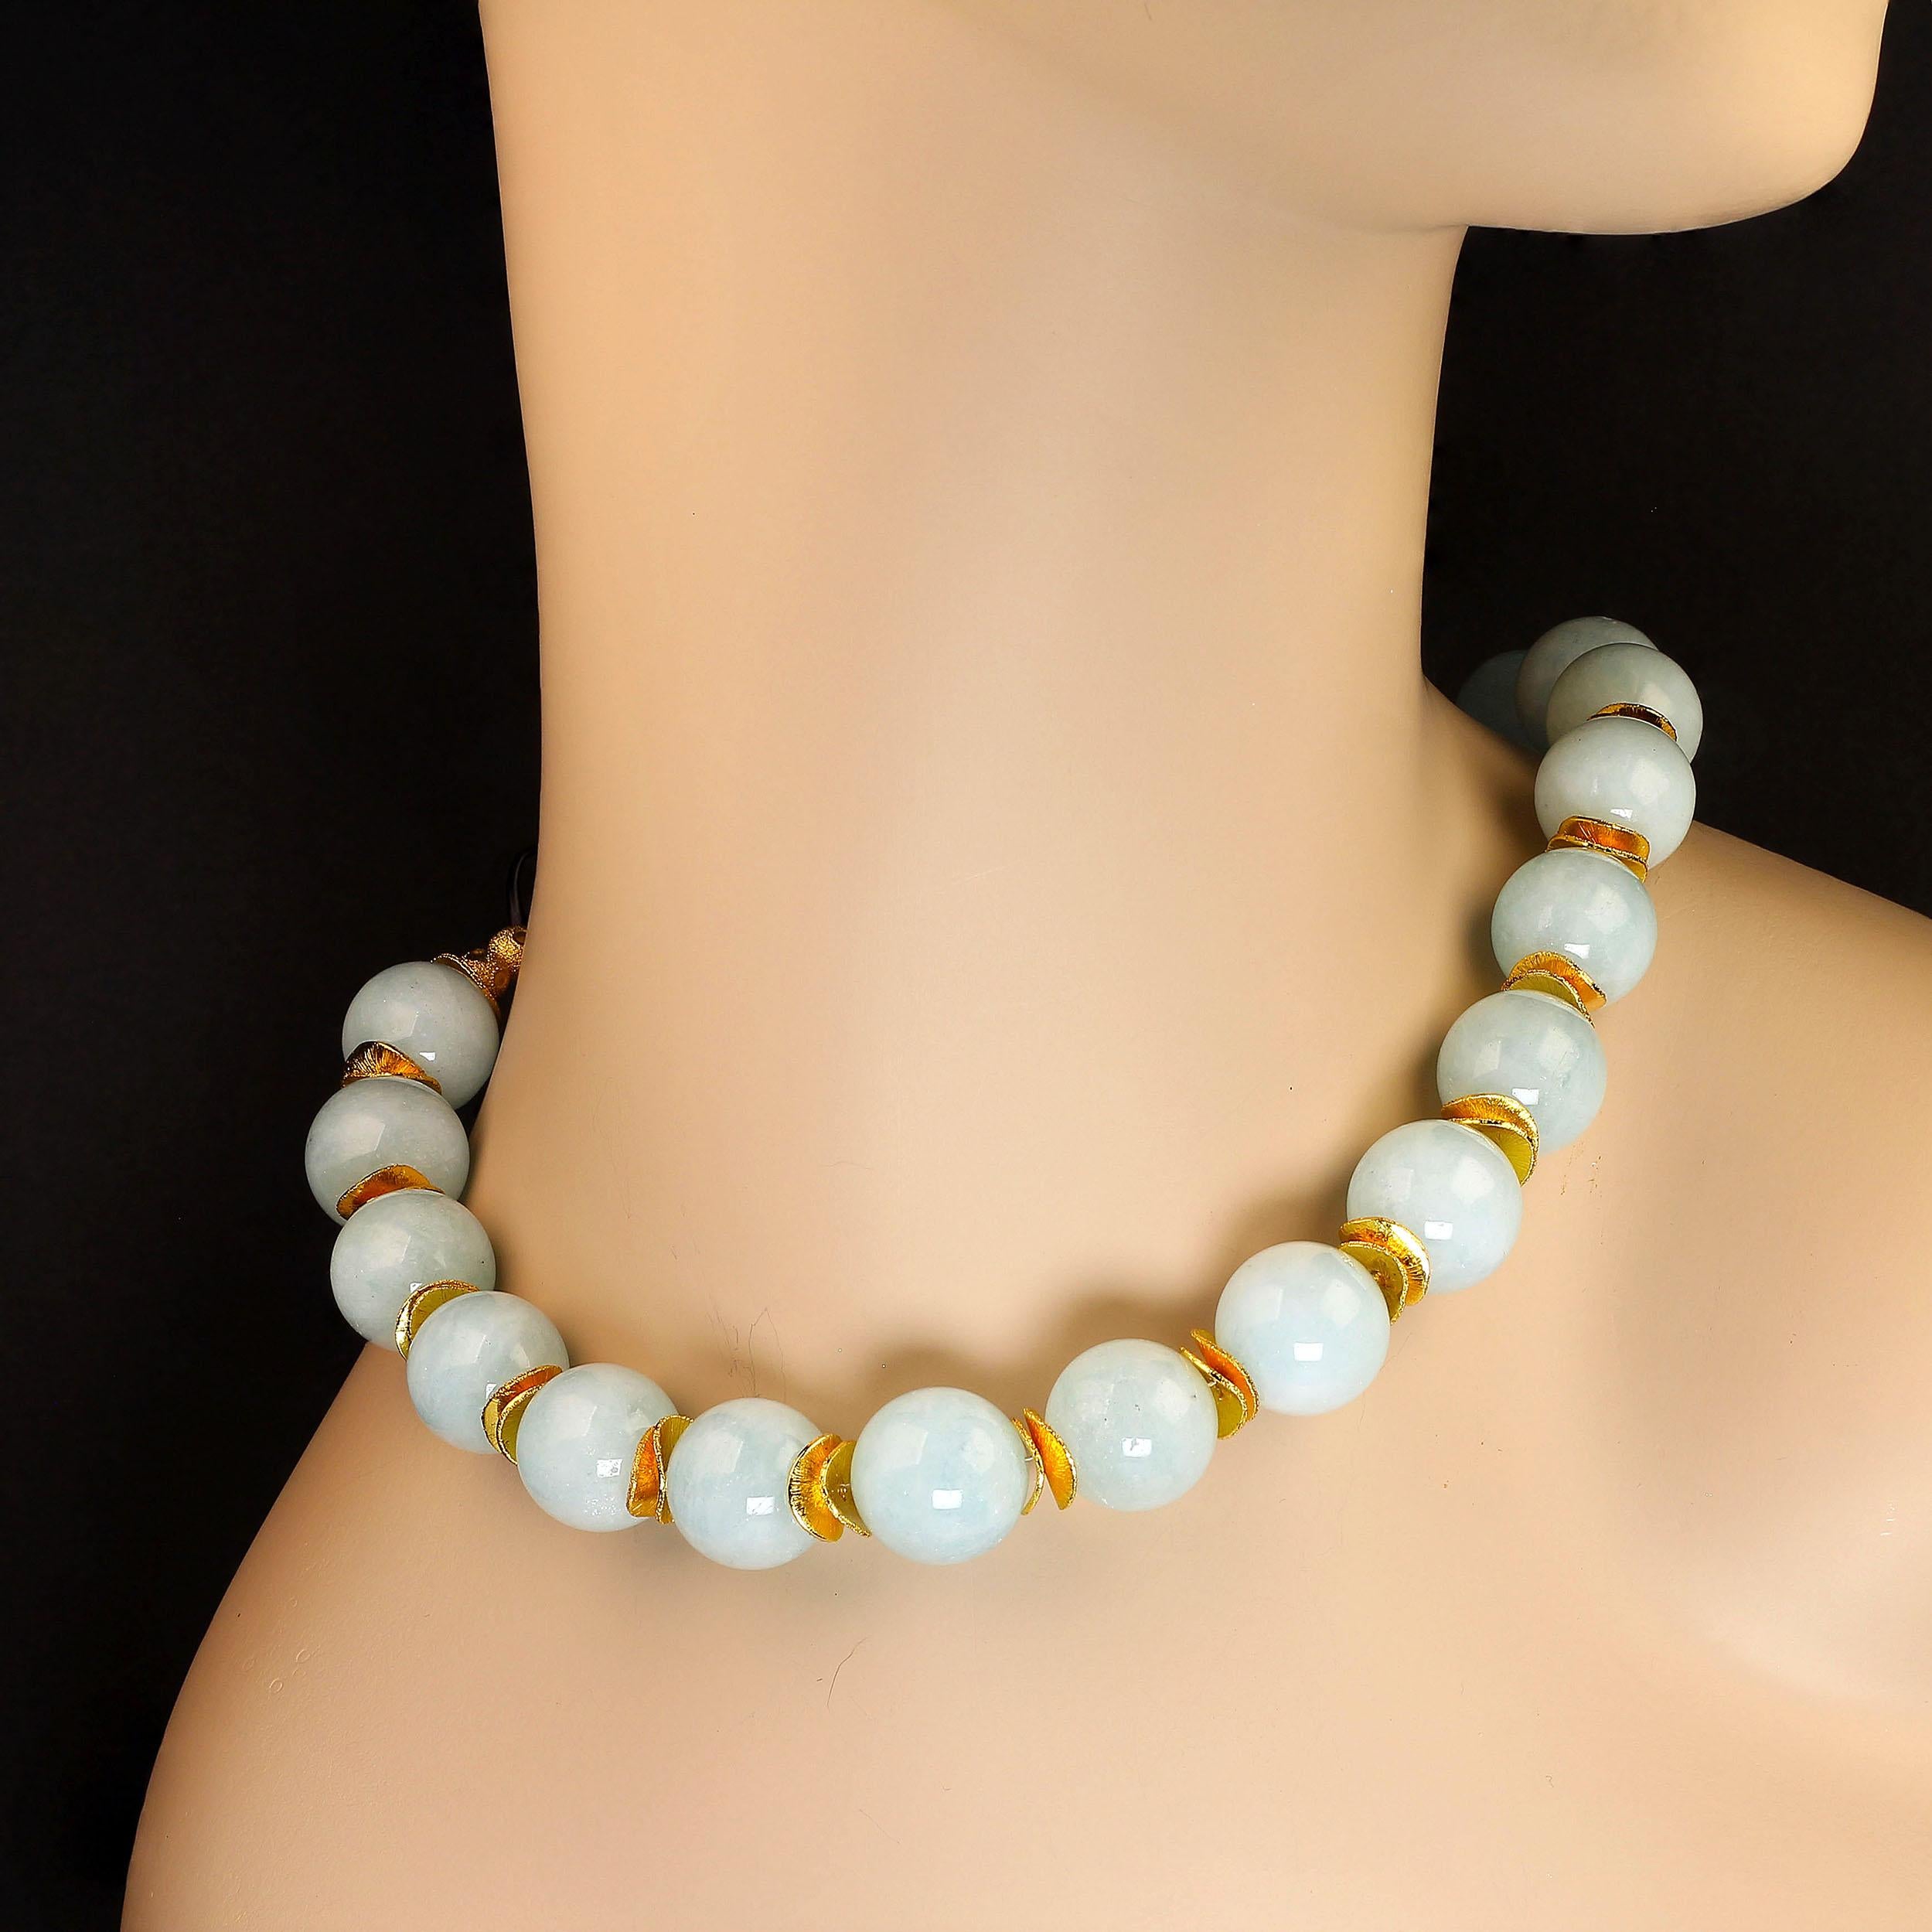 Elegant and unique, this 'aqua' toned large scale Aquamarine choker necklace makes such a great statement surrounding your neck. The 15-16 MM highly polished Aquamarine is enhanced with brushed goldy tone flutters. This 16 inch necklace features an